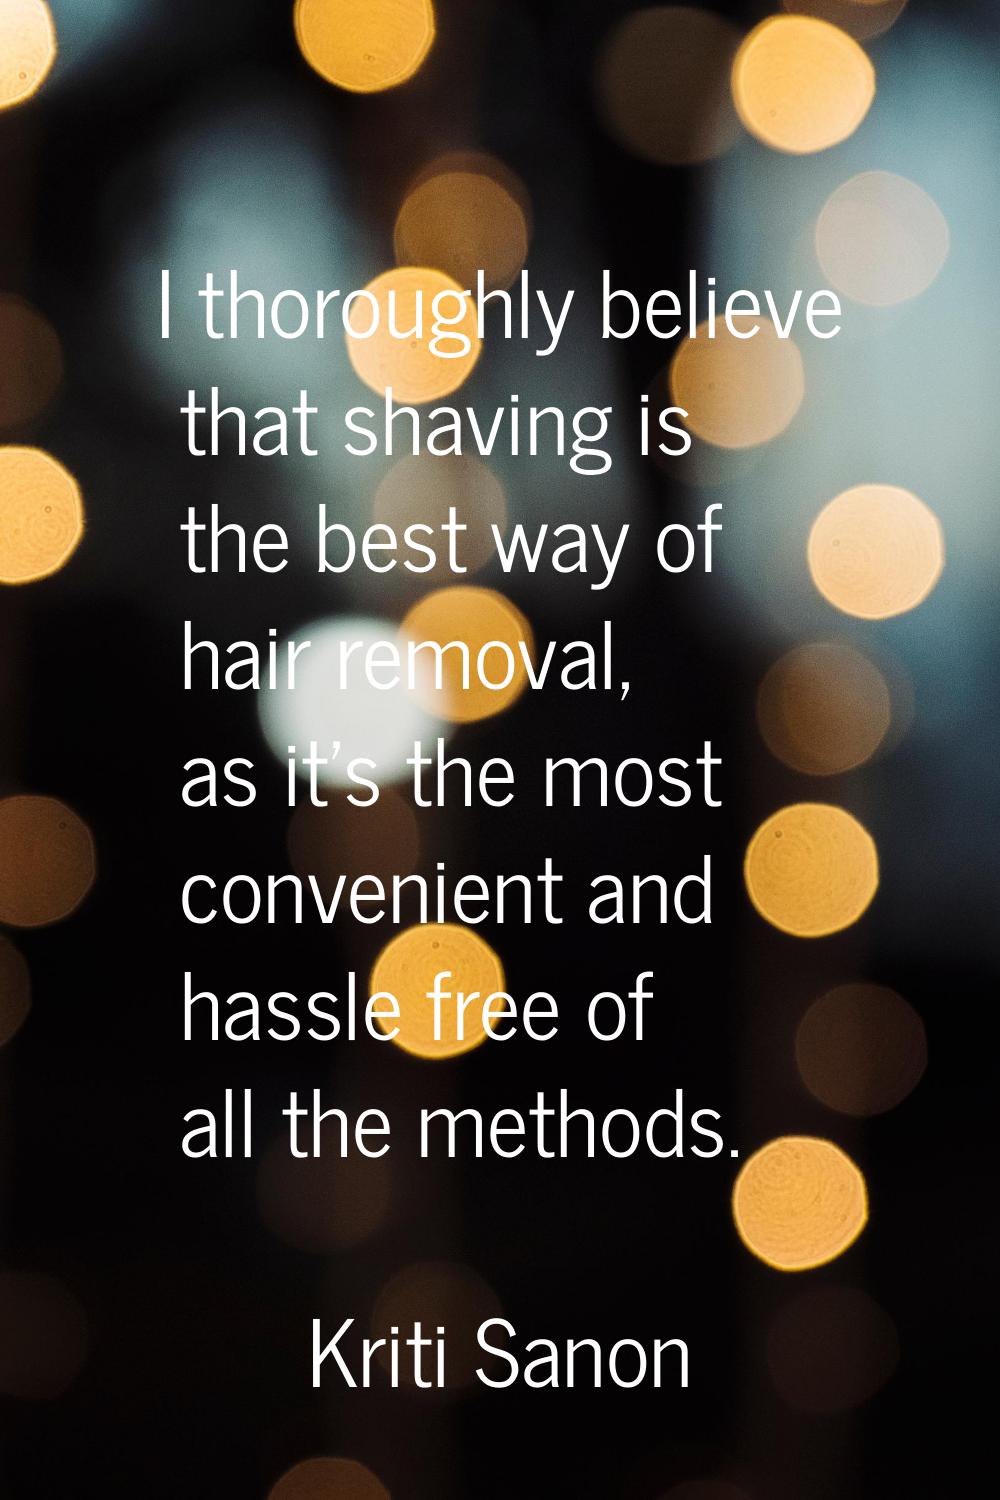 I thoroughly believe that shaving is the best way of hair removal, as it's the most convenient and 